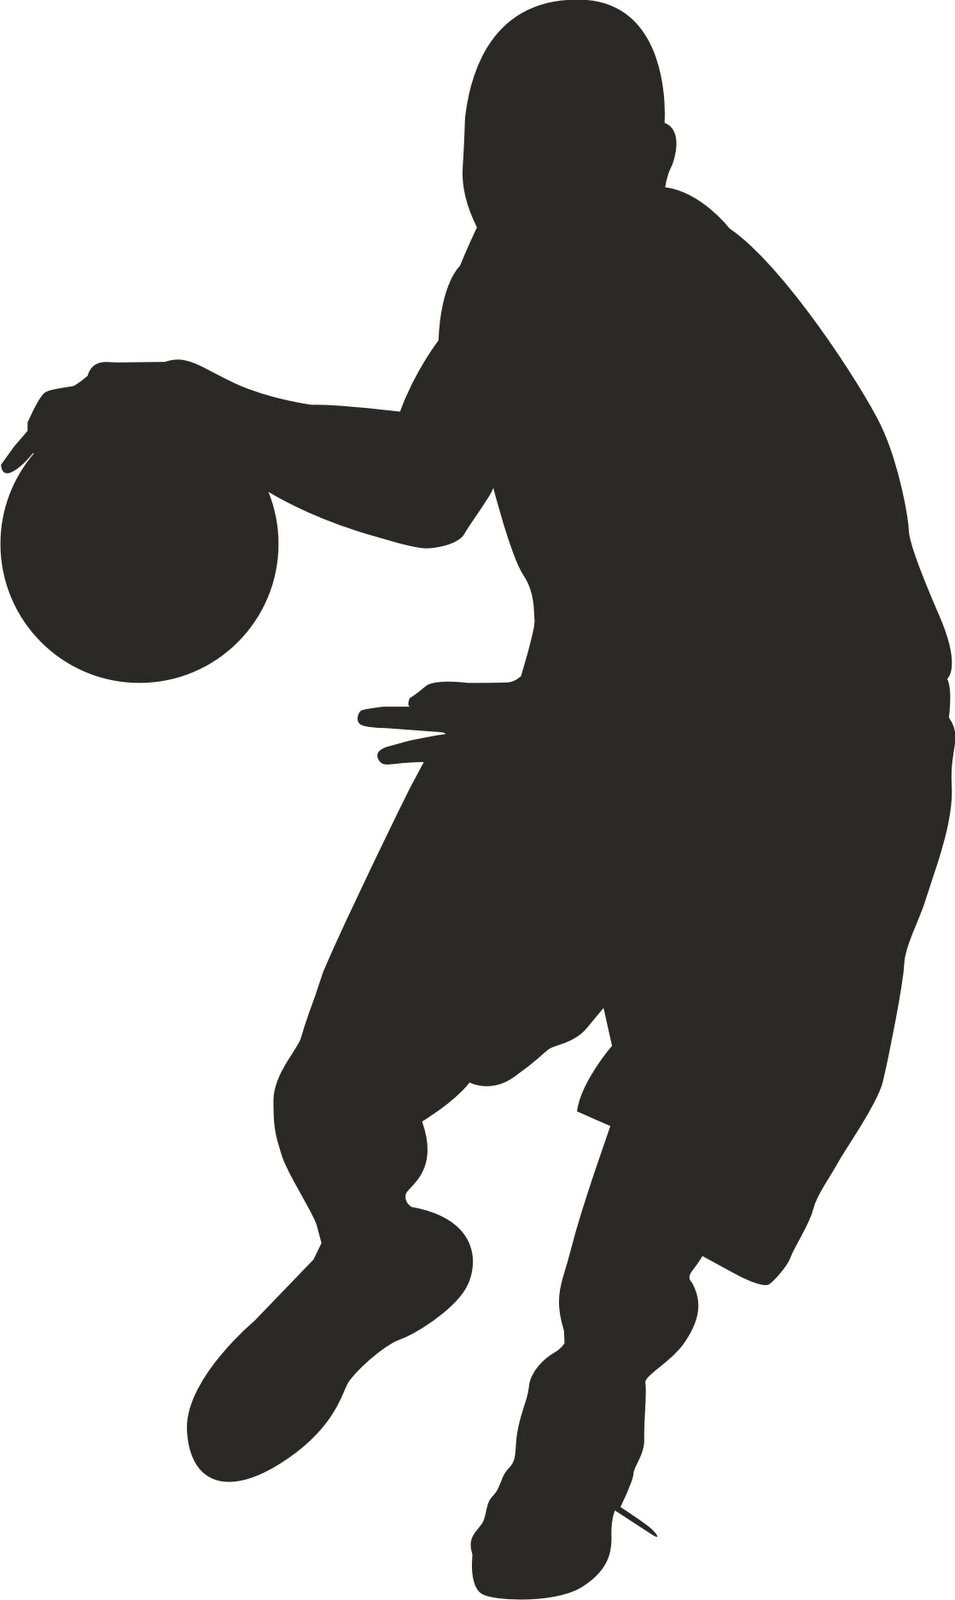 Basketball clipart free clipart image 6